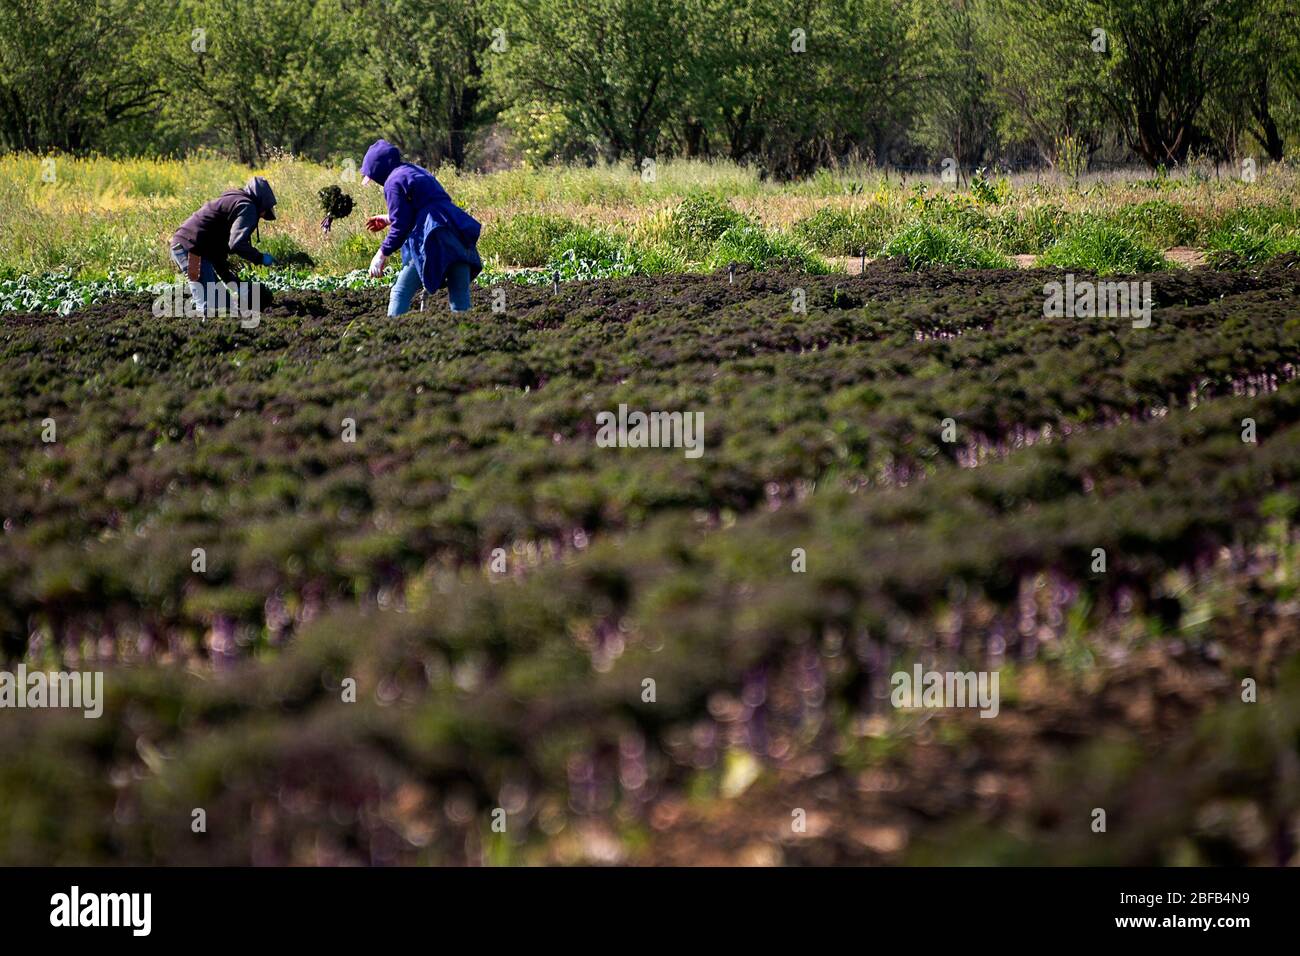 Brooks, CA, USA. 16th Apr, 2020. Farm workers at the organic Riverdog Farm in Guida stands pick redbor kale during the coronavirus pandemic on Thursday, April 16, 2020. Riverdog Farm works 450 acres of land in the Capay Valley and her company has had four-fold increase in sale of the csa (community supported agriculture) boxes of fresh produce as her restaurants sales have diminished. Credit: Paul Kitagaki Jr./ZUMA Wire/Alamy Live News Stock Photo